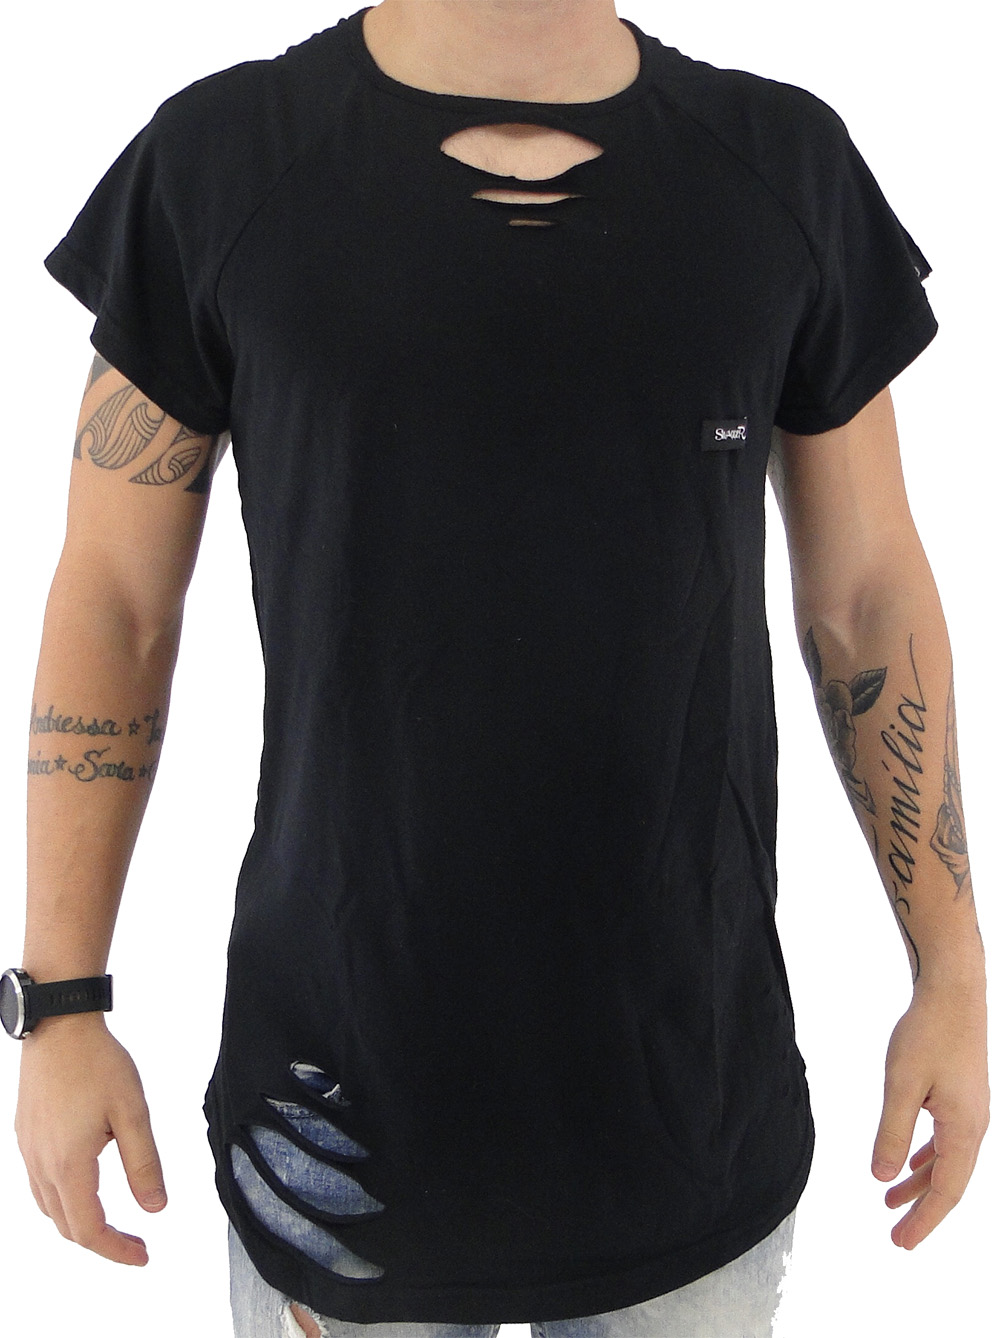 Camiseta Muscle Swagger Destroyed Preta